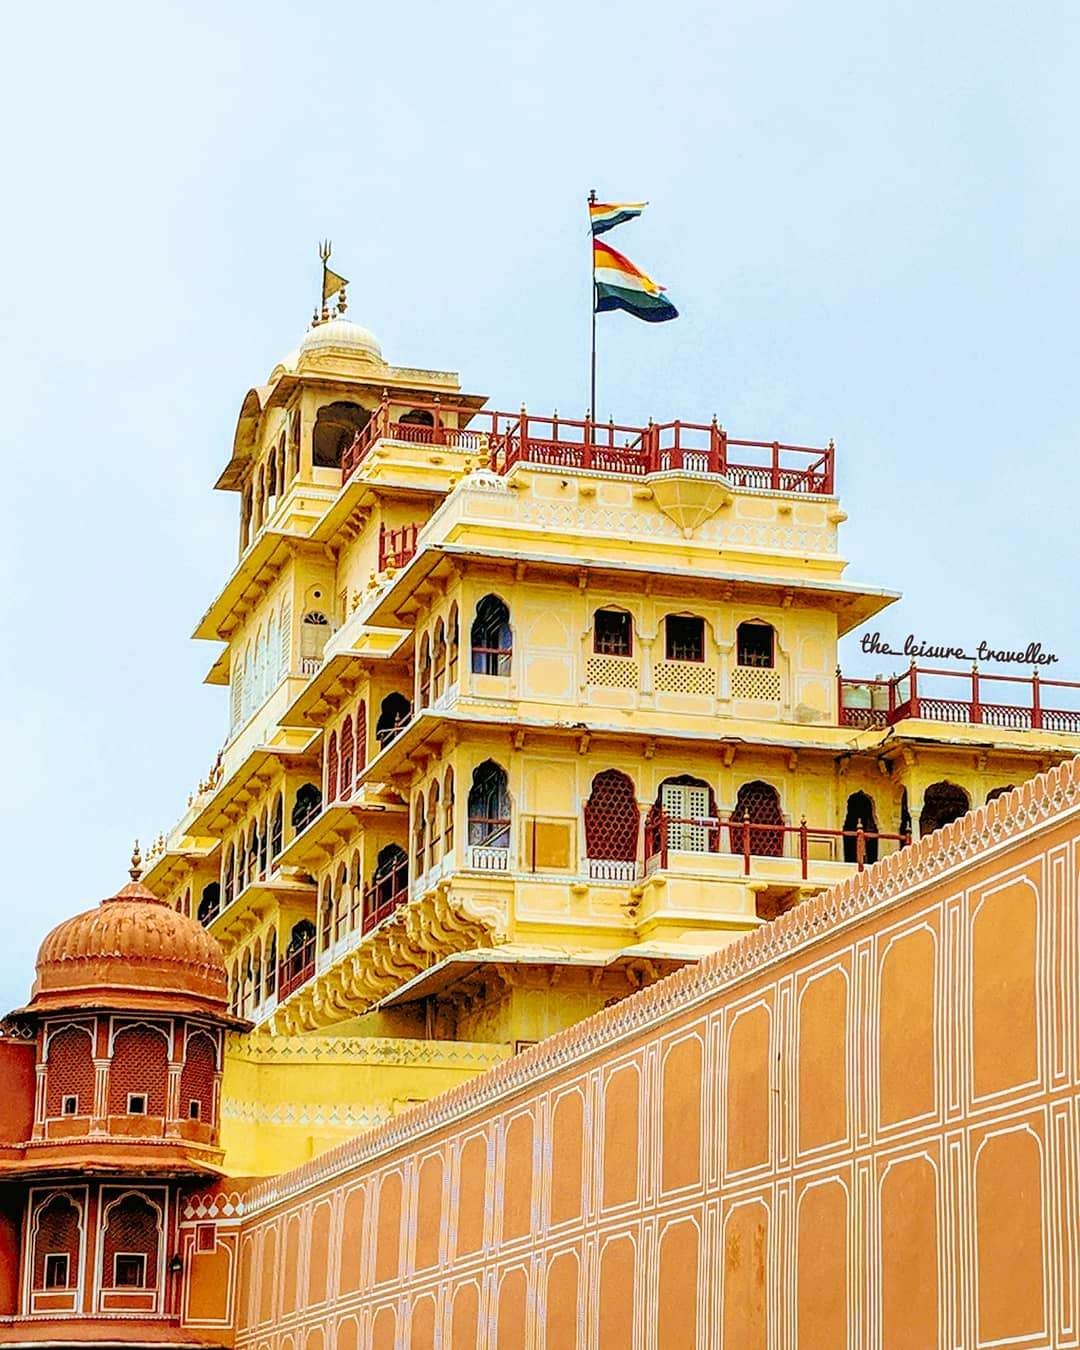 Landmark,Architecture,Building,Yellow,Palace,Facade,Classical architecture,Flag,Tourism,Balcony